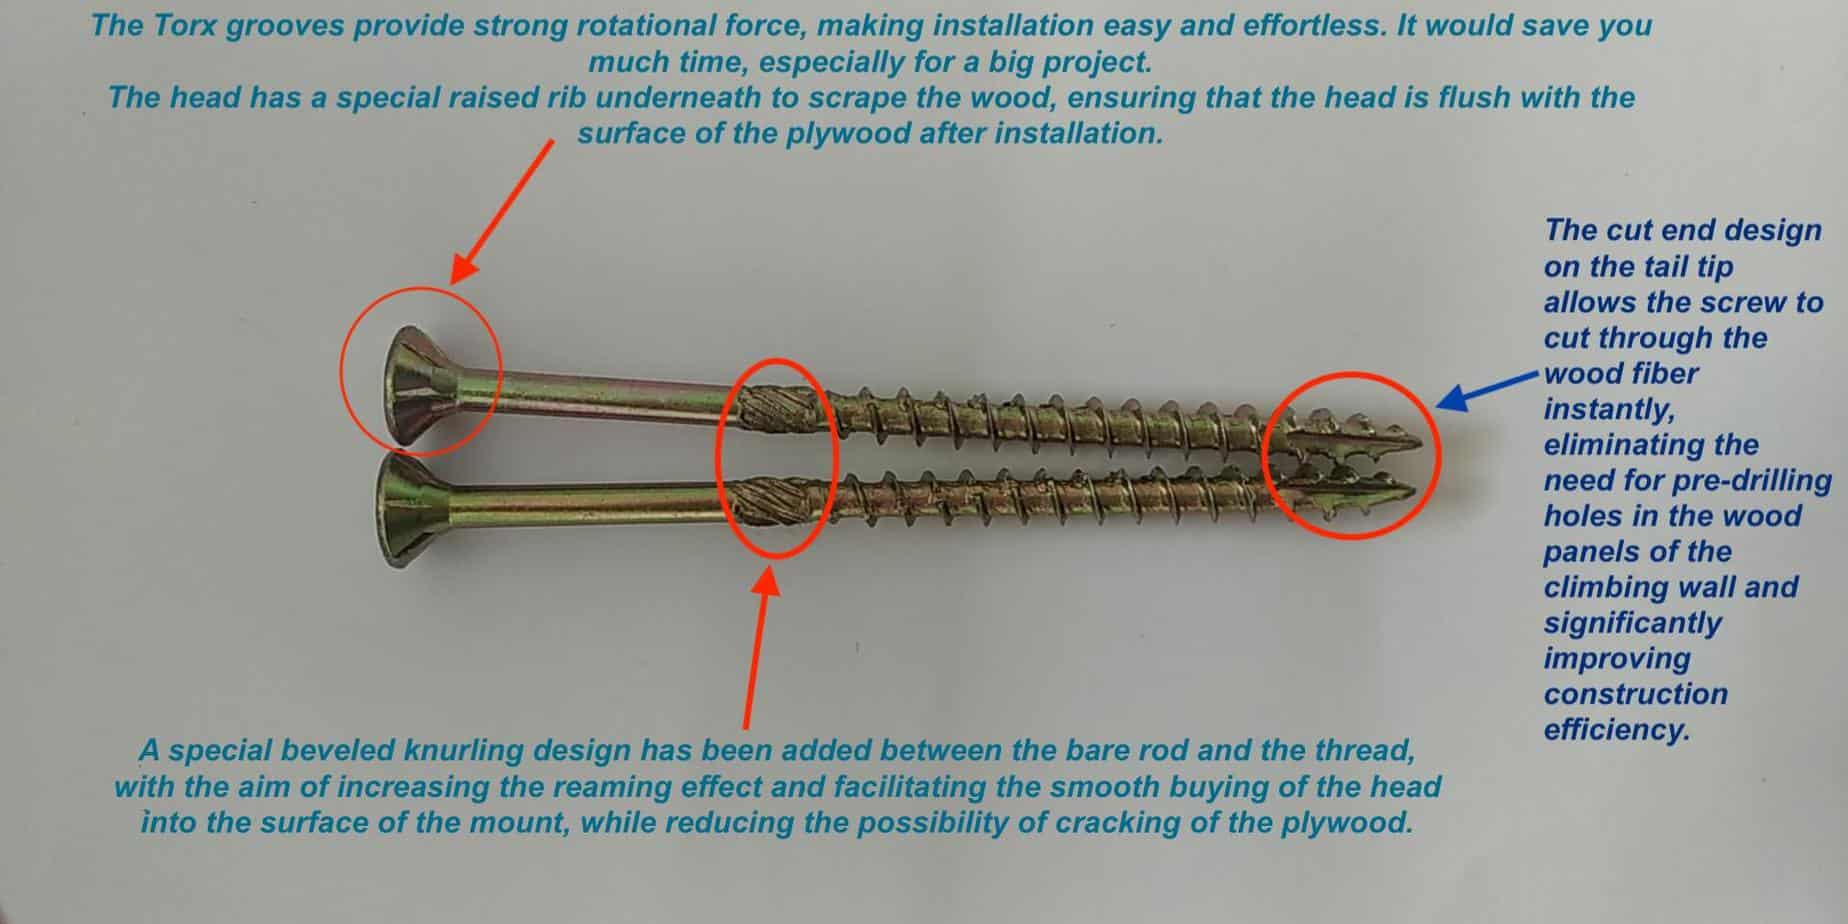 Most-Detailed-Advantages-of-Torx-Head-Wood-Screw_RMC